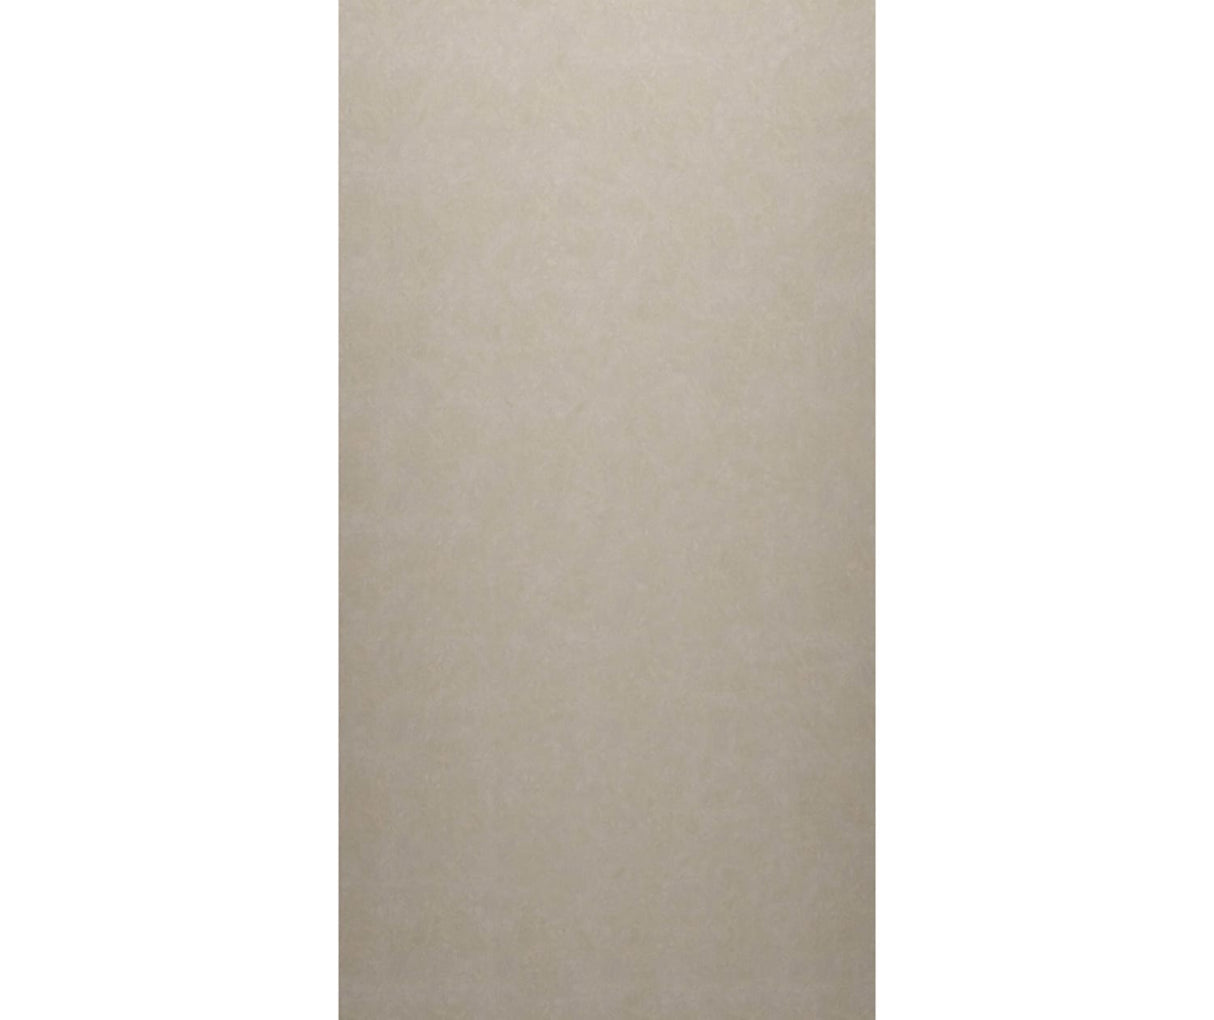 Swanstone SMMK-7250-1 50 x 72 Swanstone Smooth Tile Glue up Bathtub and Shower Single Wall Panel in Limestone SMMK7250.218